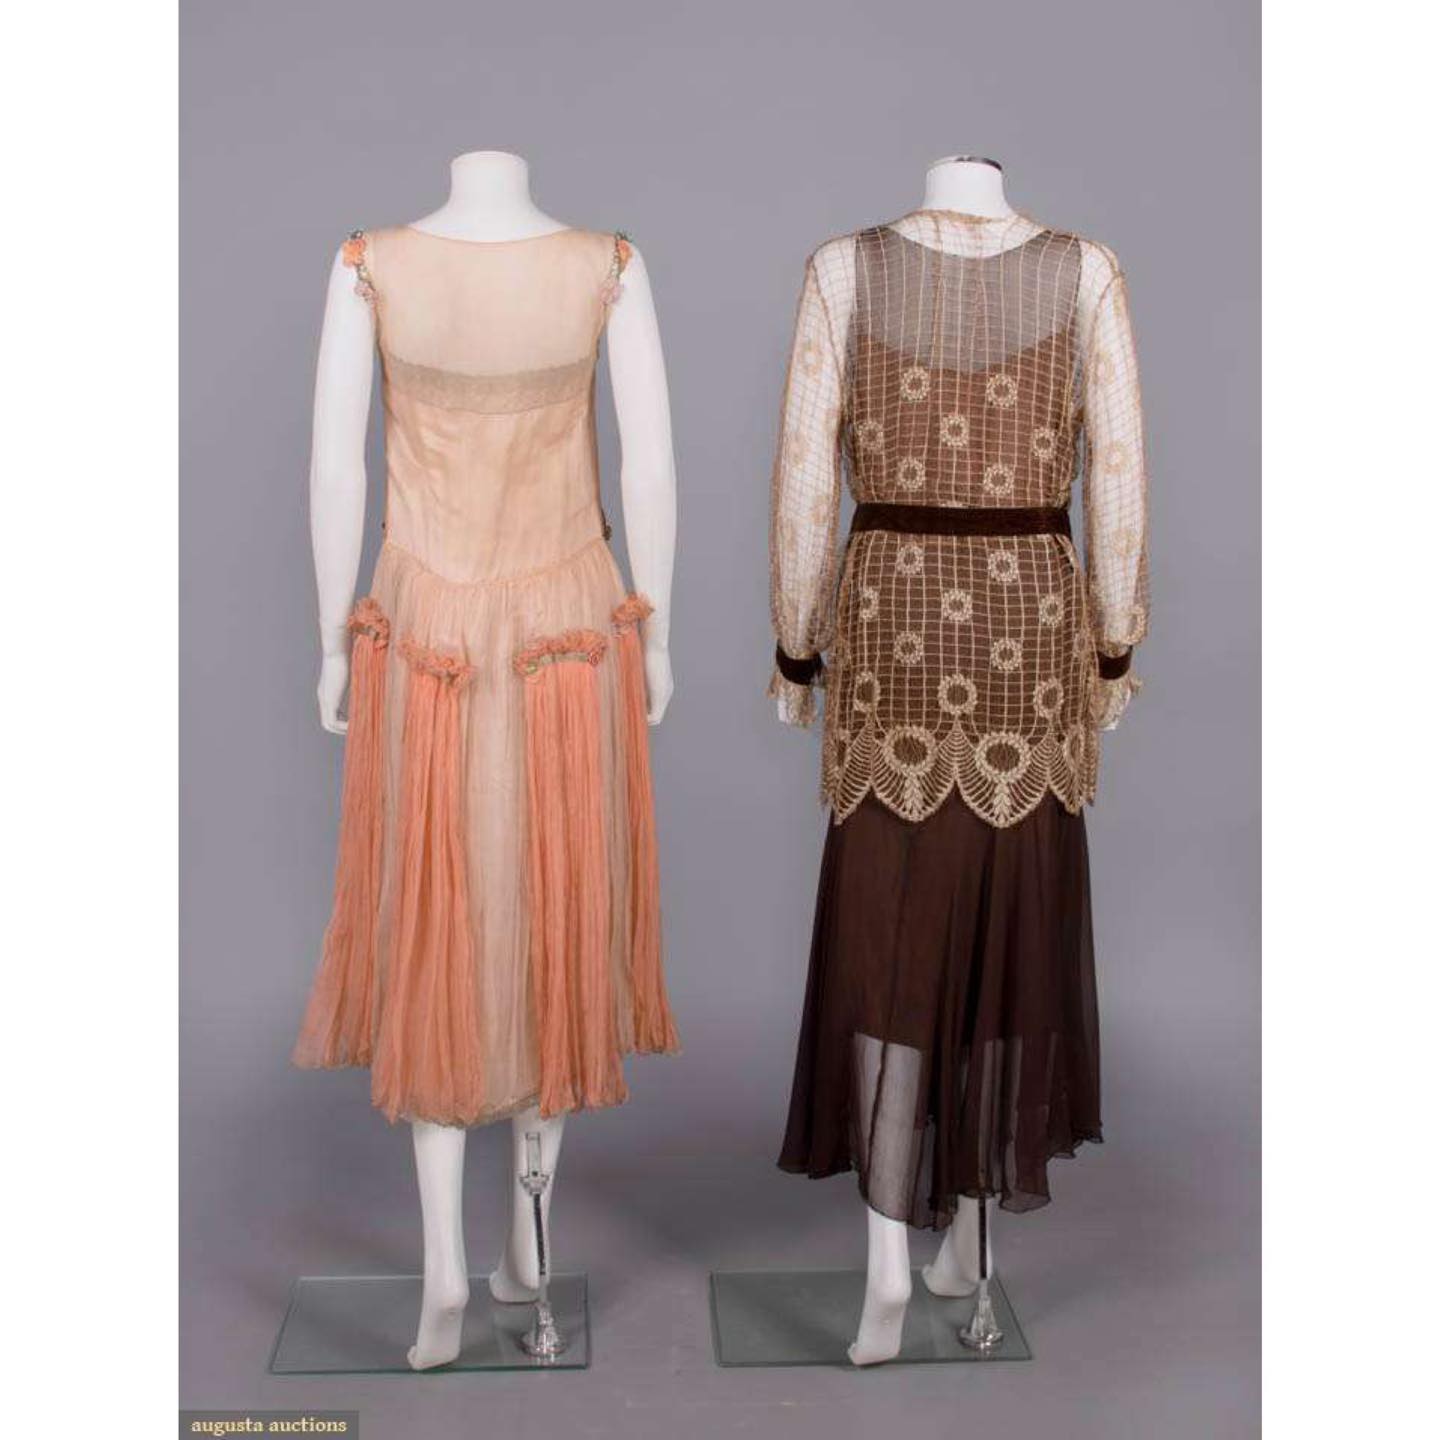 Evening dress, 1920s, Crepe chiffon over silk satin with lame ribbon applique and fine inserted edging, rhinestones, corded silk rosettes and gathered peach chiffon cascades sold by Augusta Auctions, June 2023